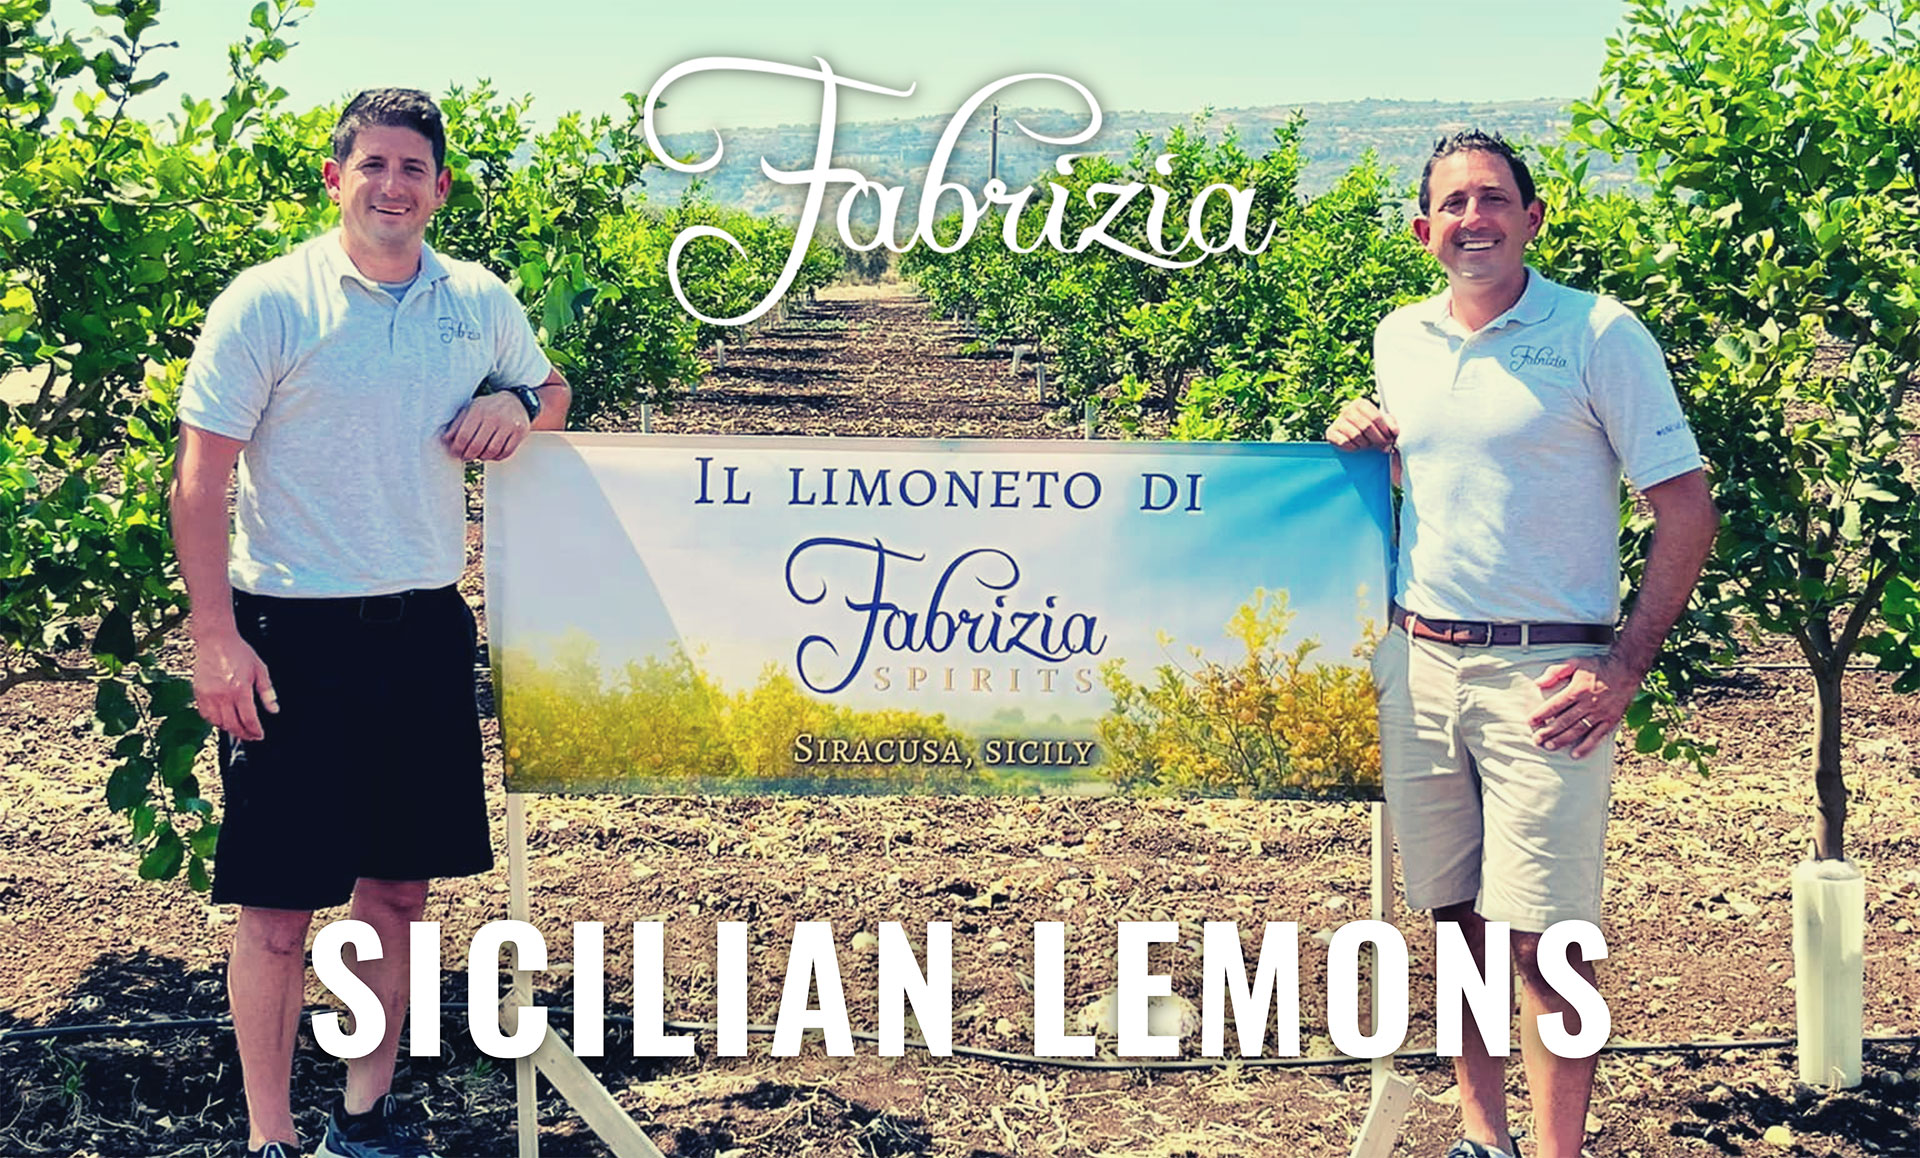 Fabrizia Owners At Sicilian Lemon Grove Where They Source Their Lemons To Make Limoncello